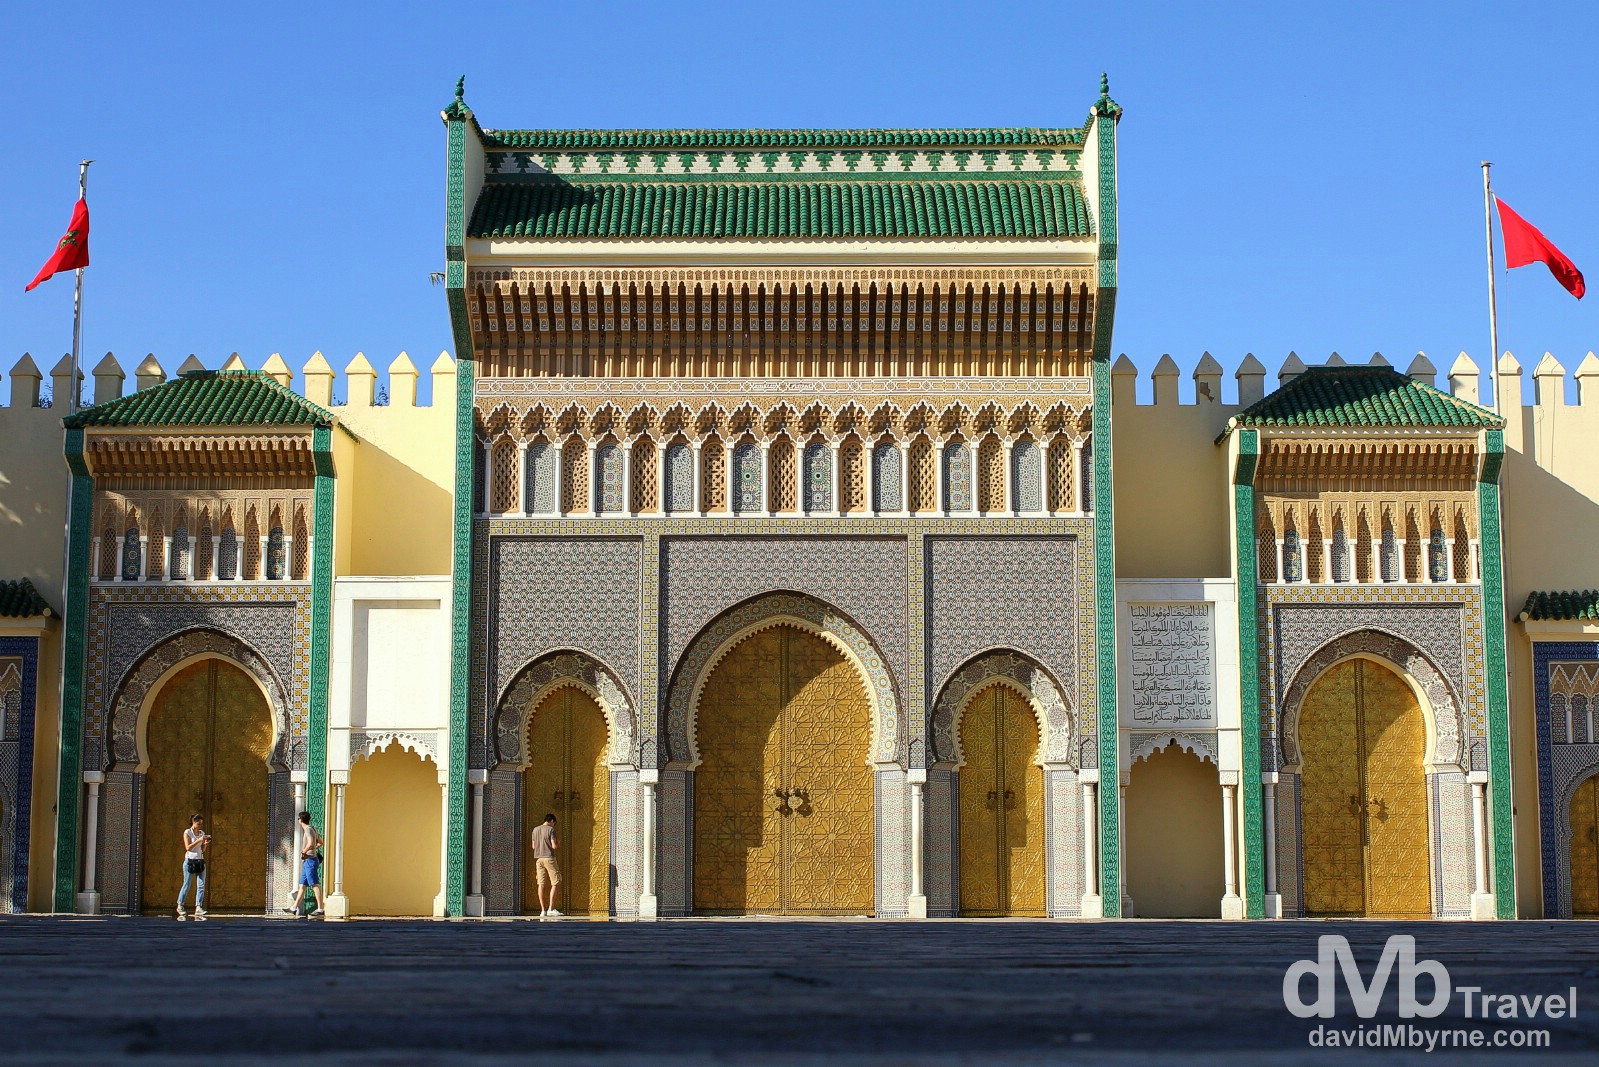 One of the impressive entrance gates to the Royal Palace in Fes el Djedid (New Fes), Fes, Morocco. May 28th, 2014. 